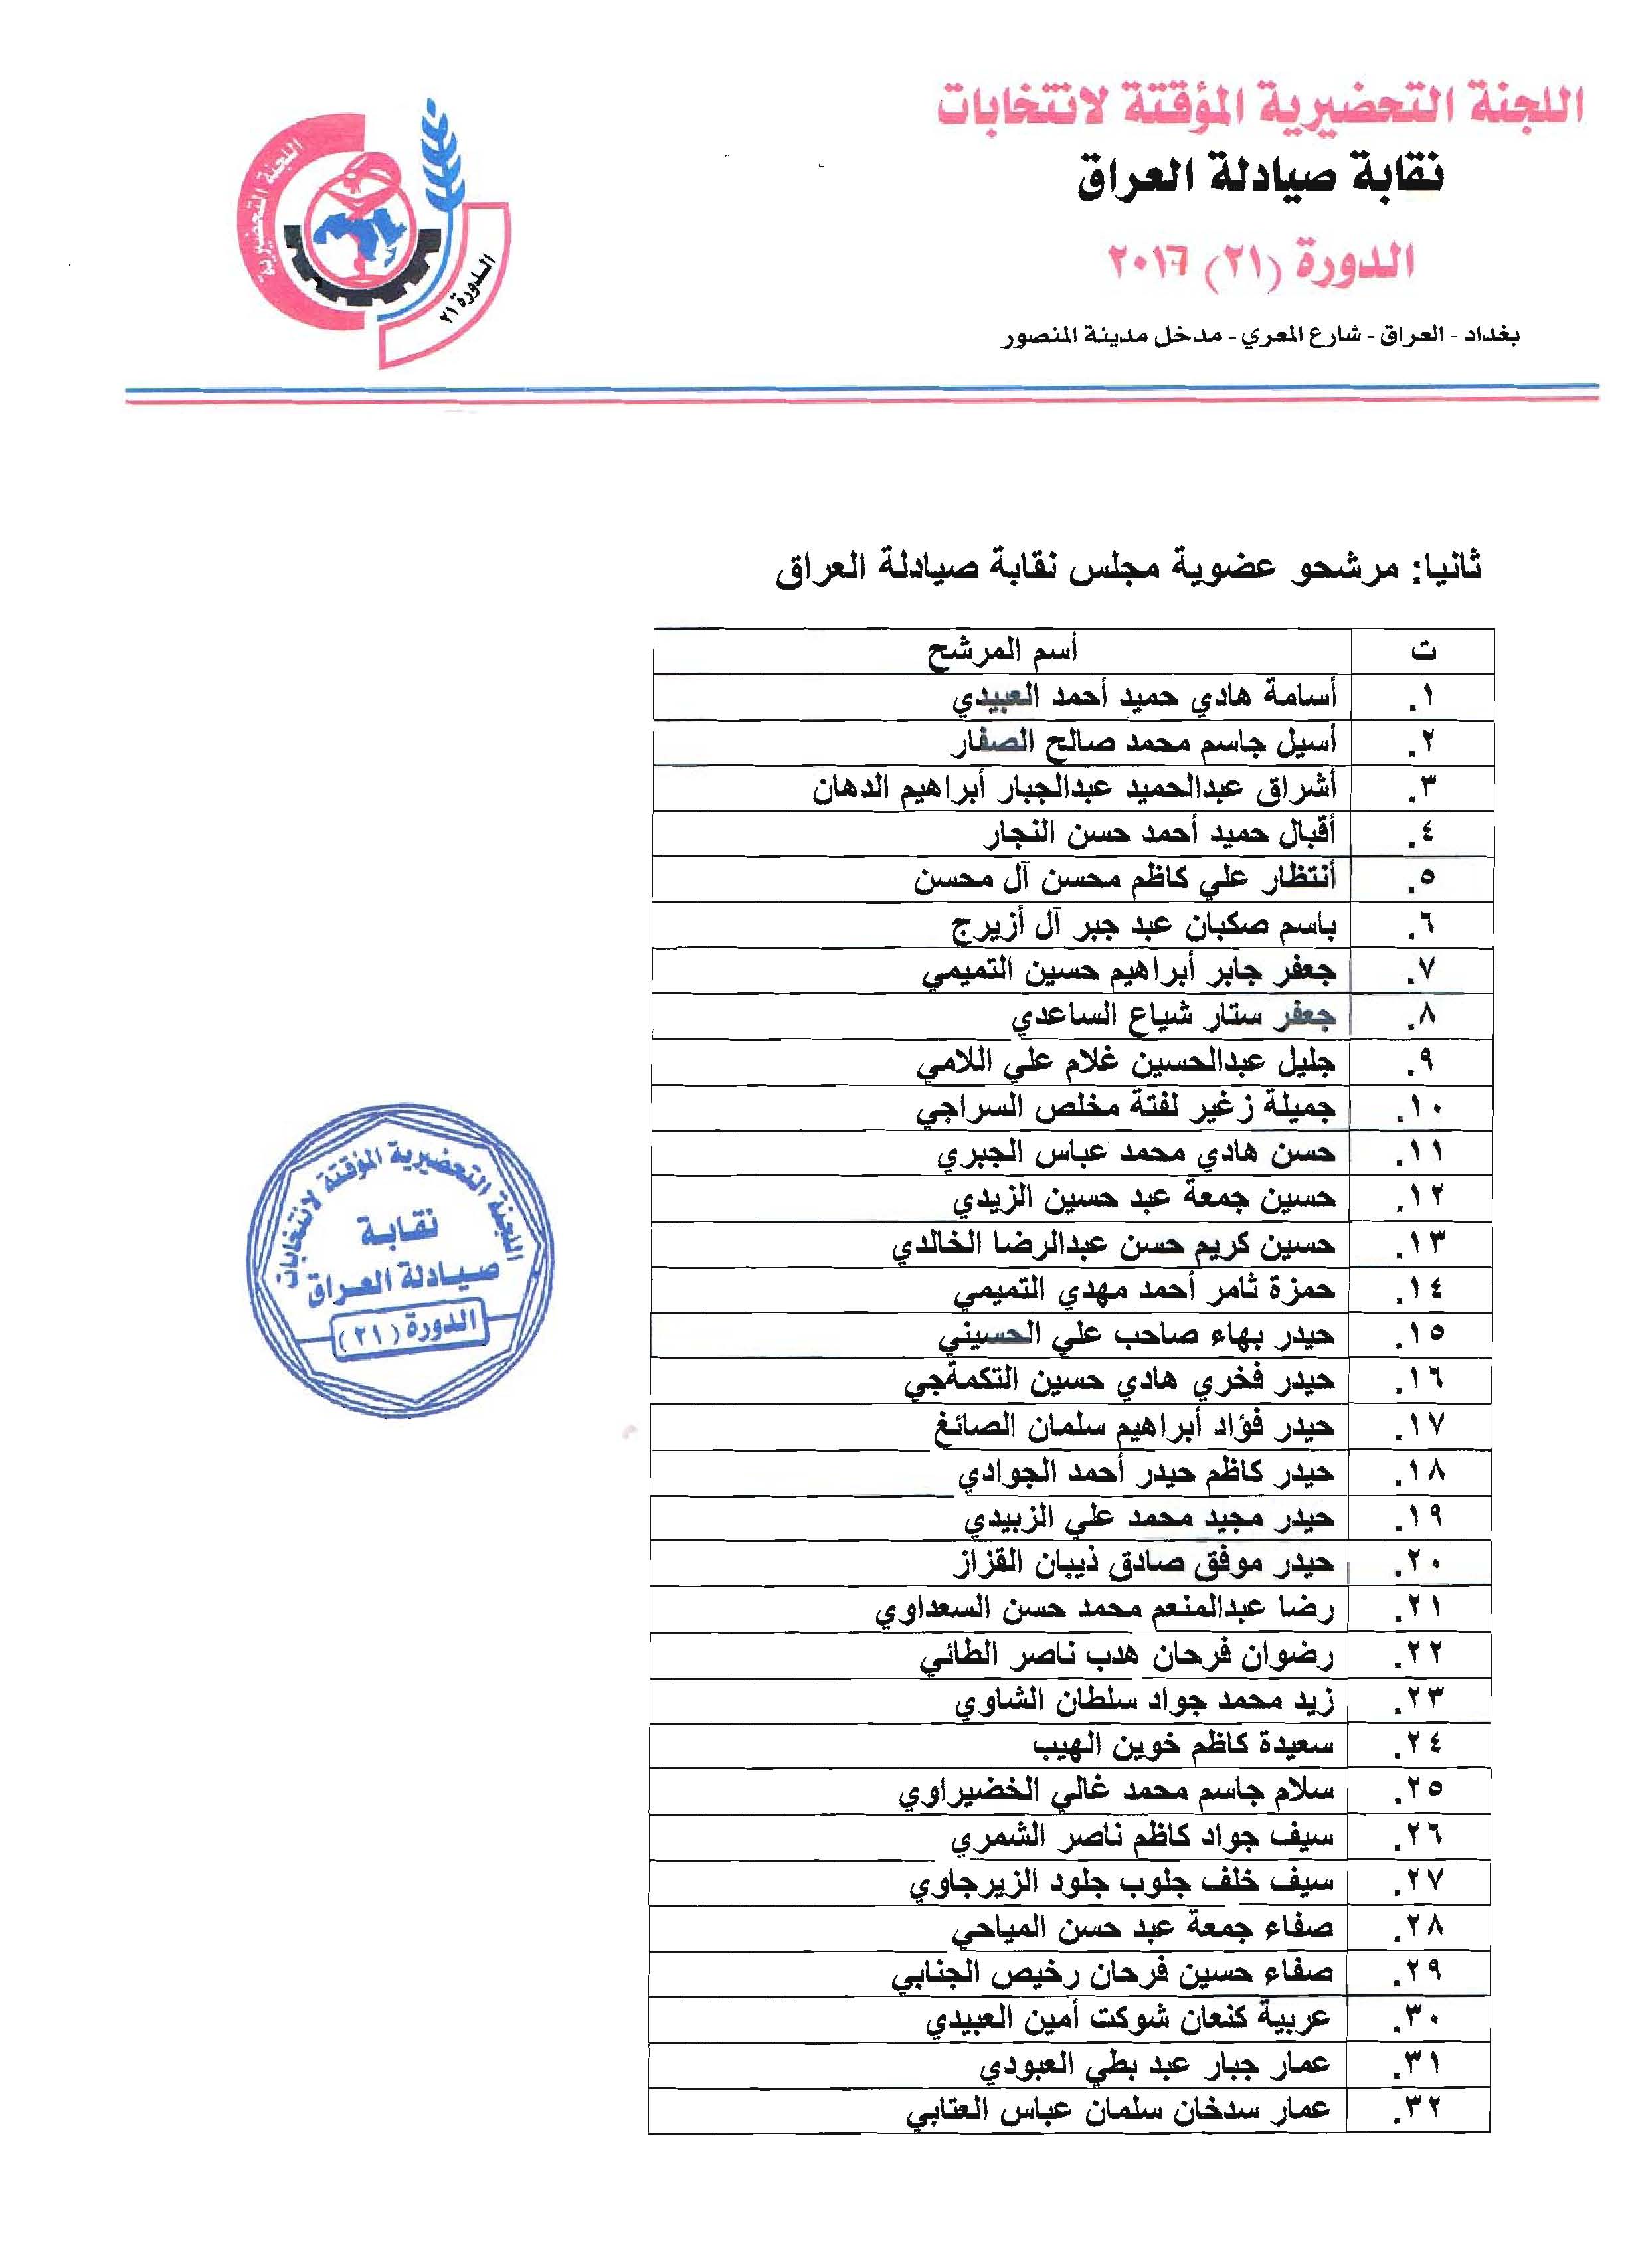 elect_Page_05